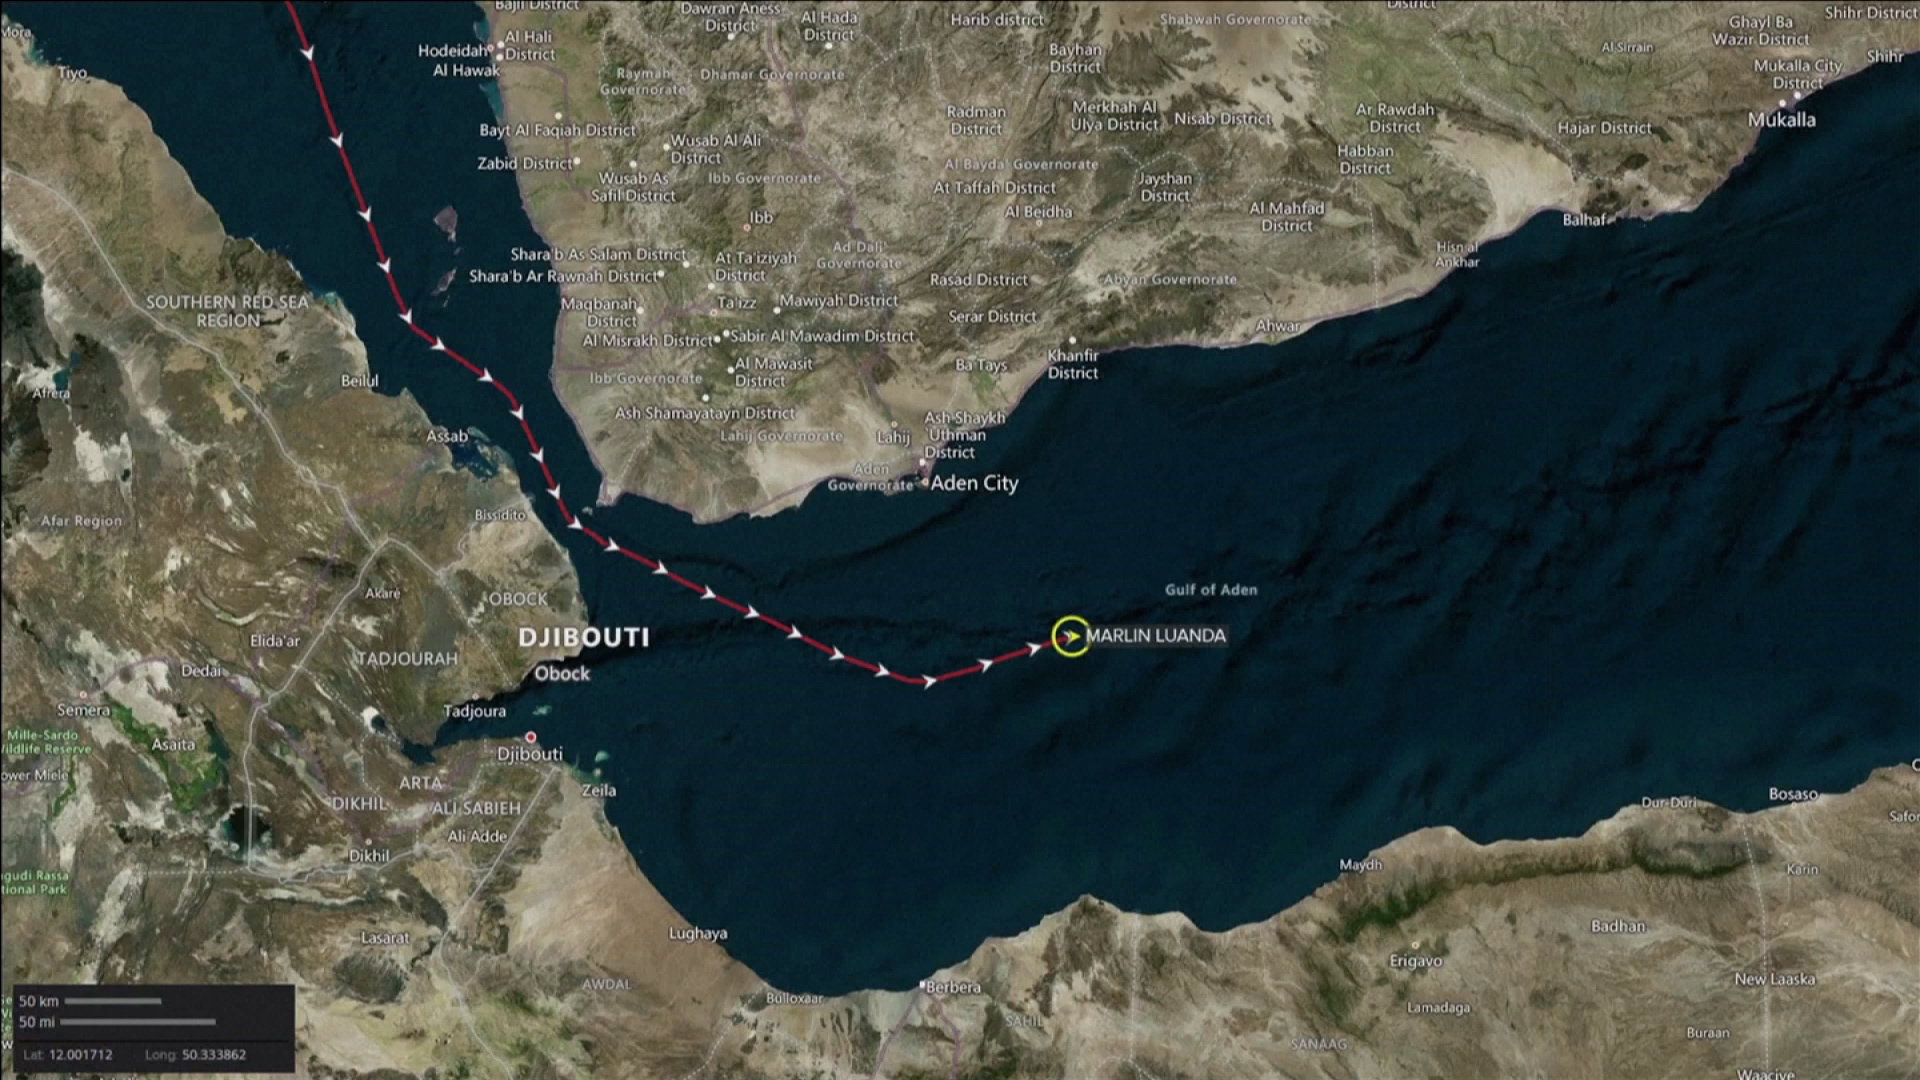 Video shows satellite tracking of the oil tanker Marlin Luanda over the past 48 hours leading up to the Houthi missile attack in the Gulf of Aden.